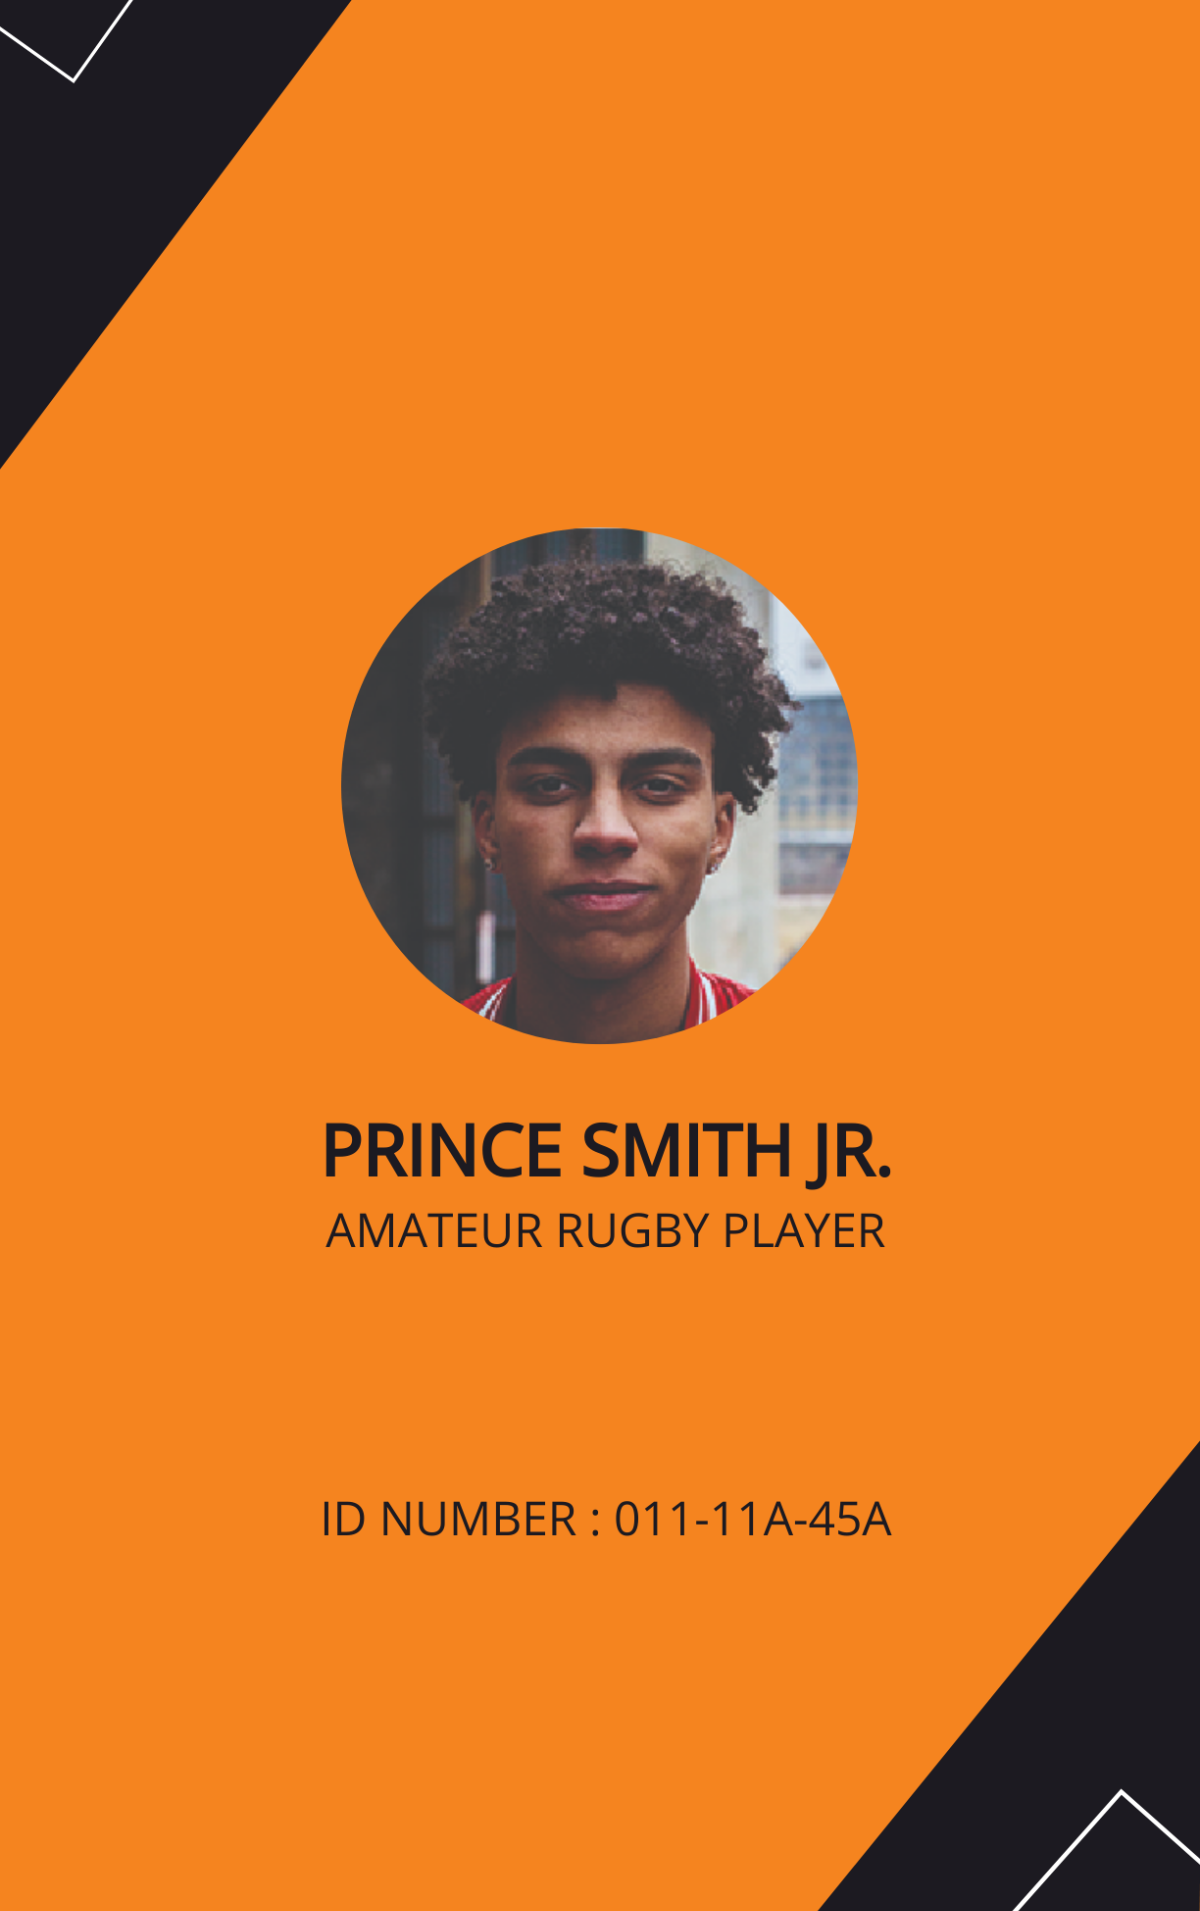 Printable Sports ID Card Template